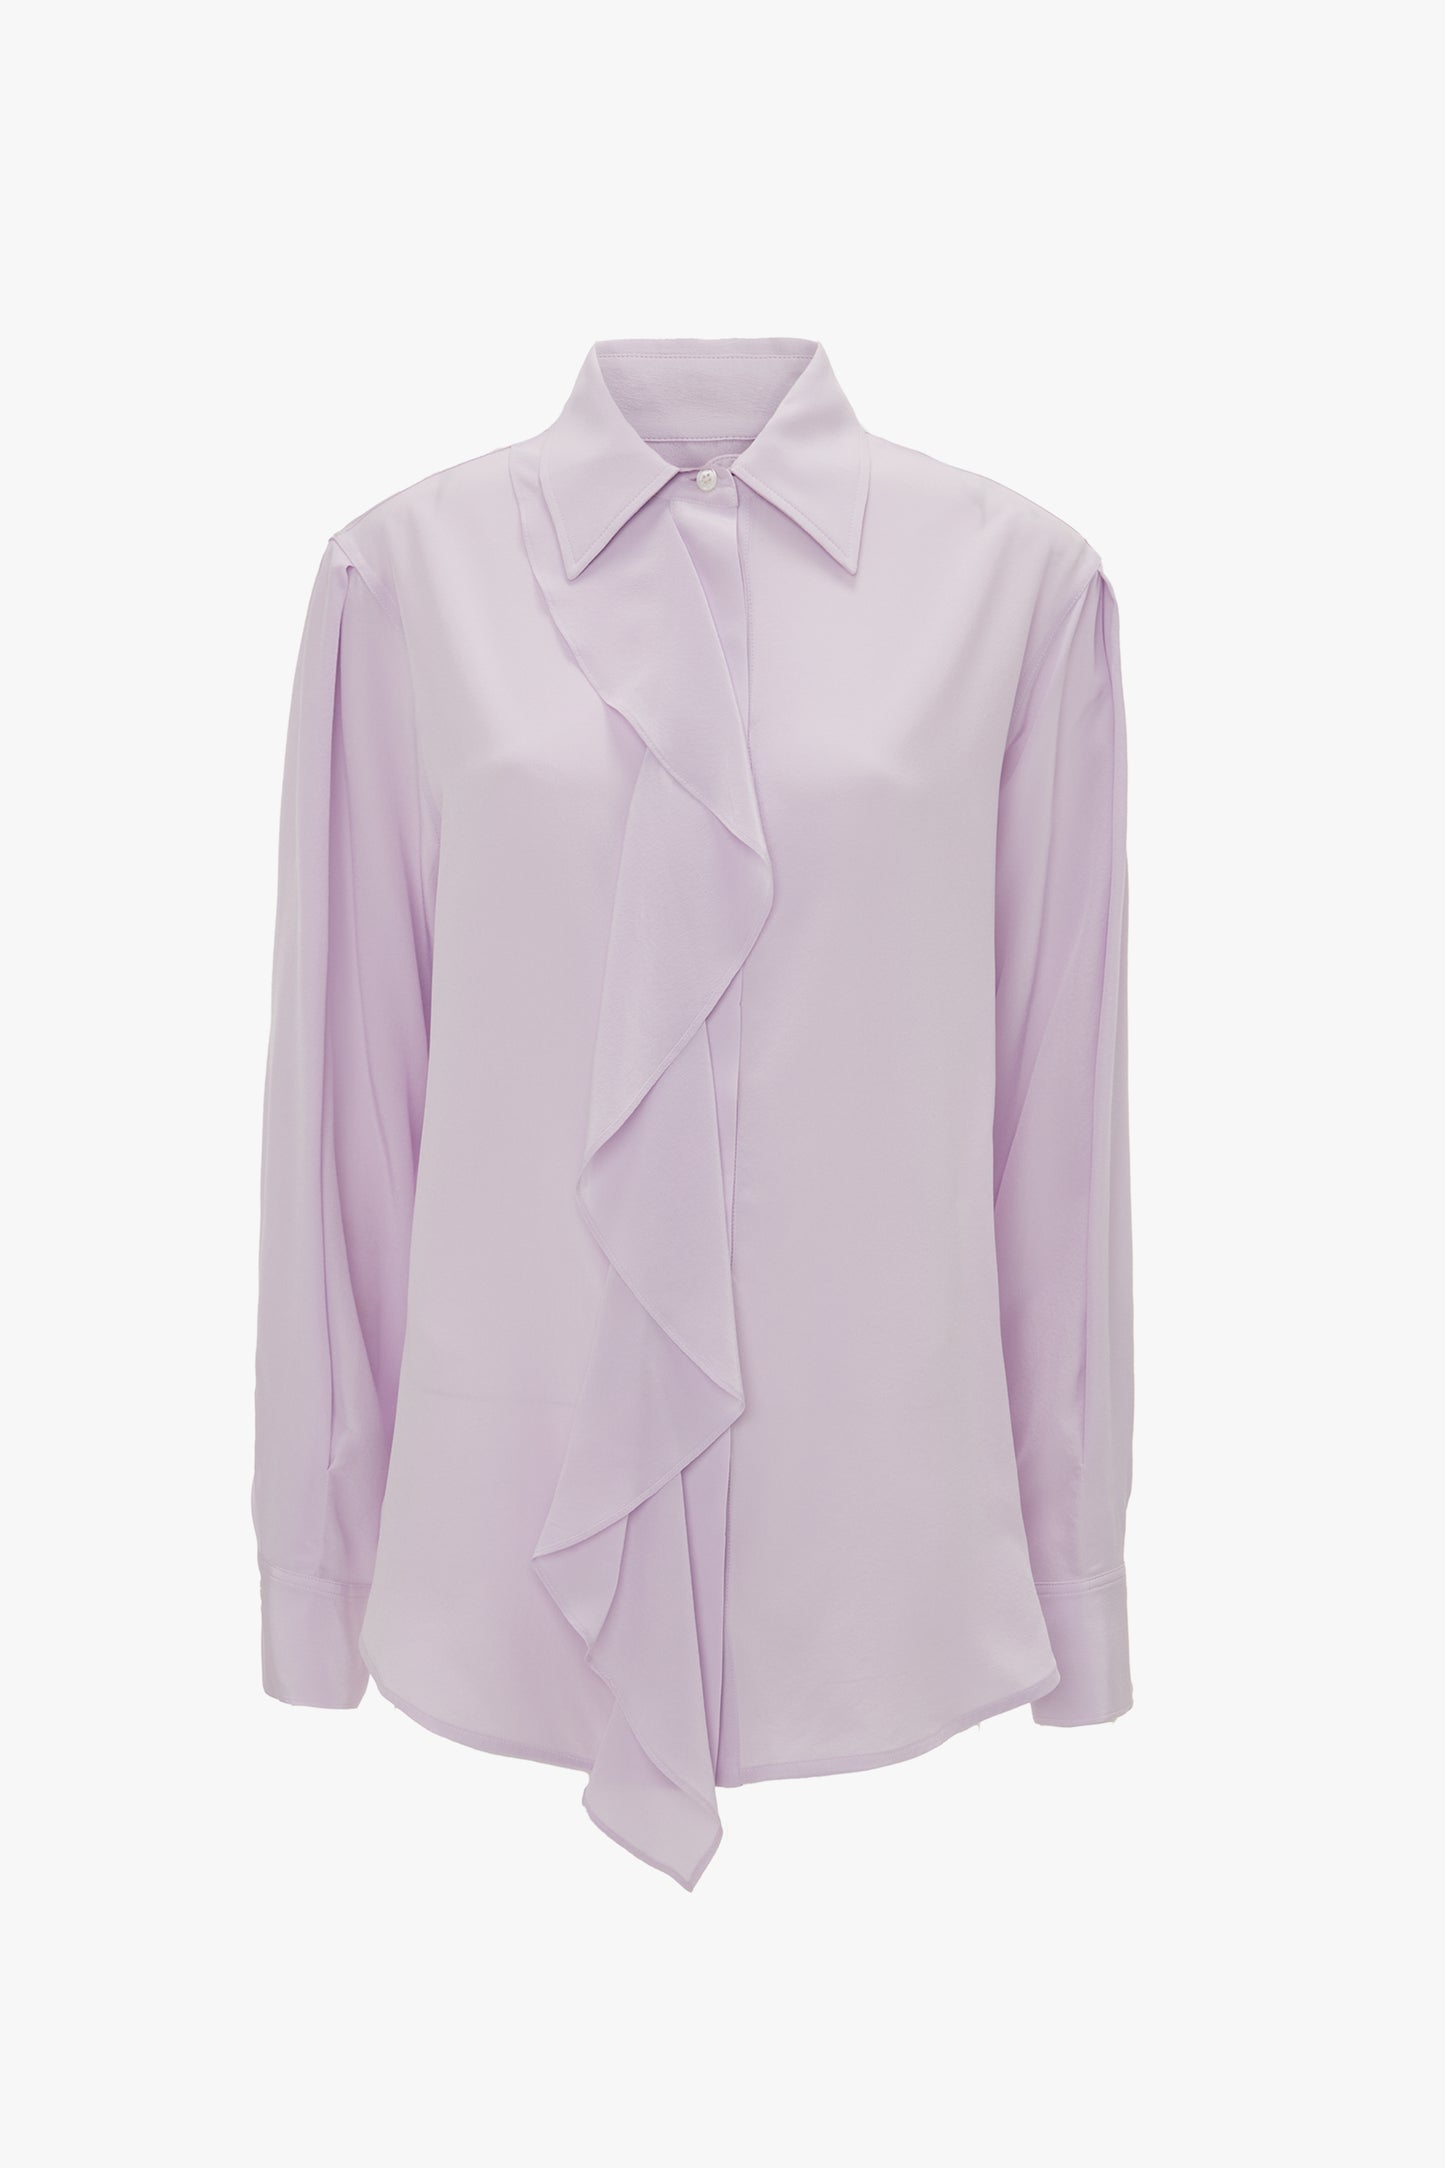 A Victoria Beckham Asymmetric Ruffle Blouse In Petunia with a classic collar, displayed against a white background.